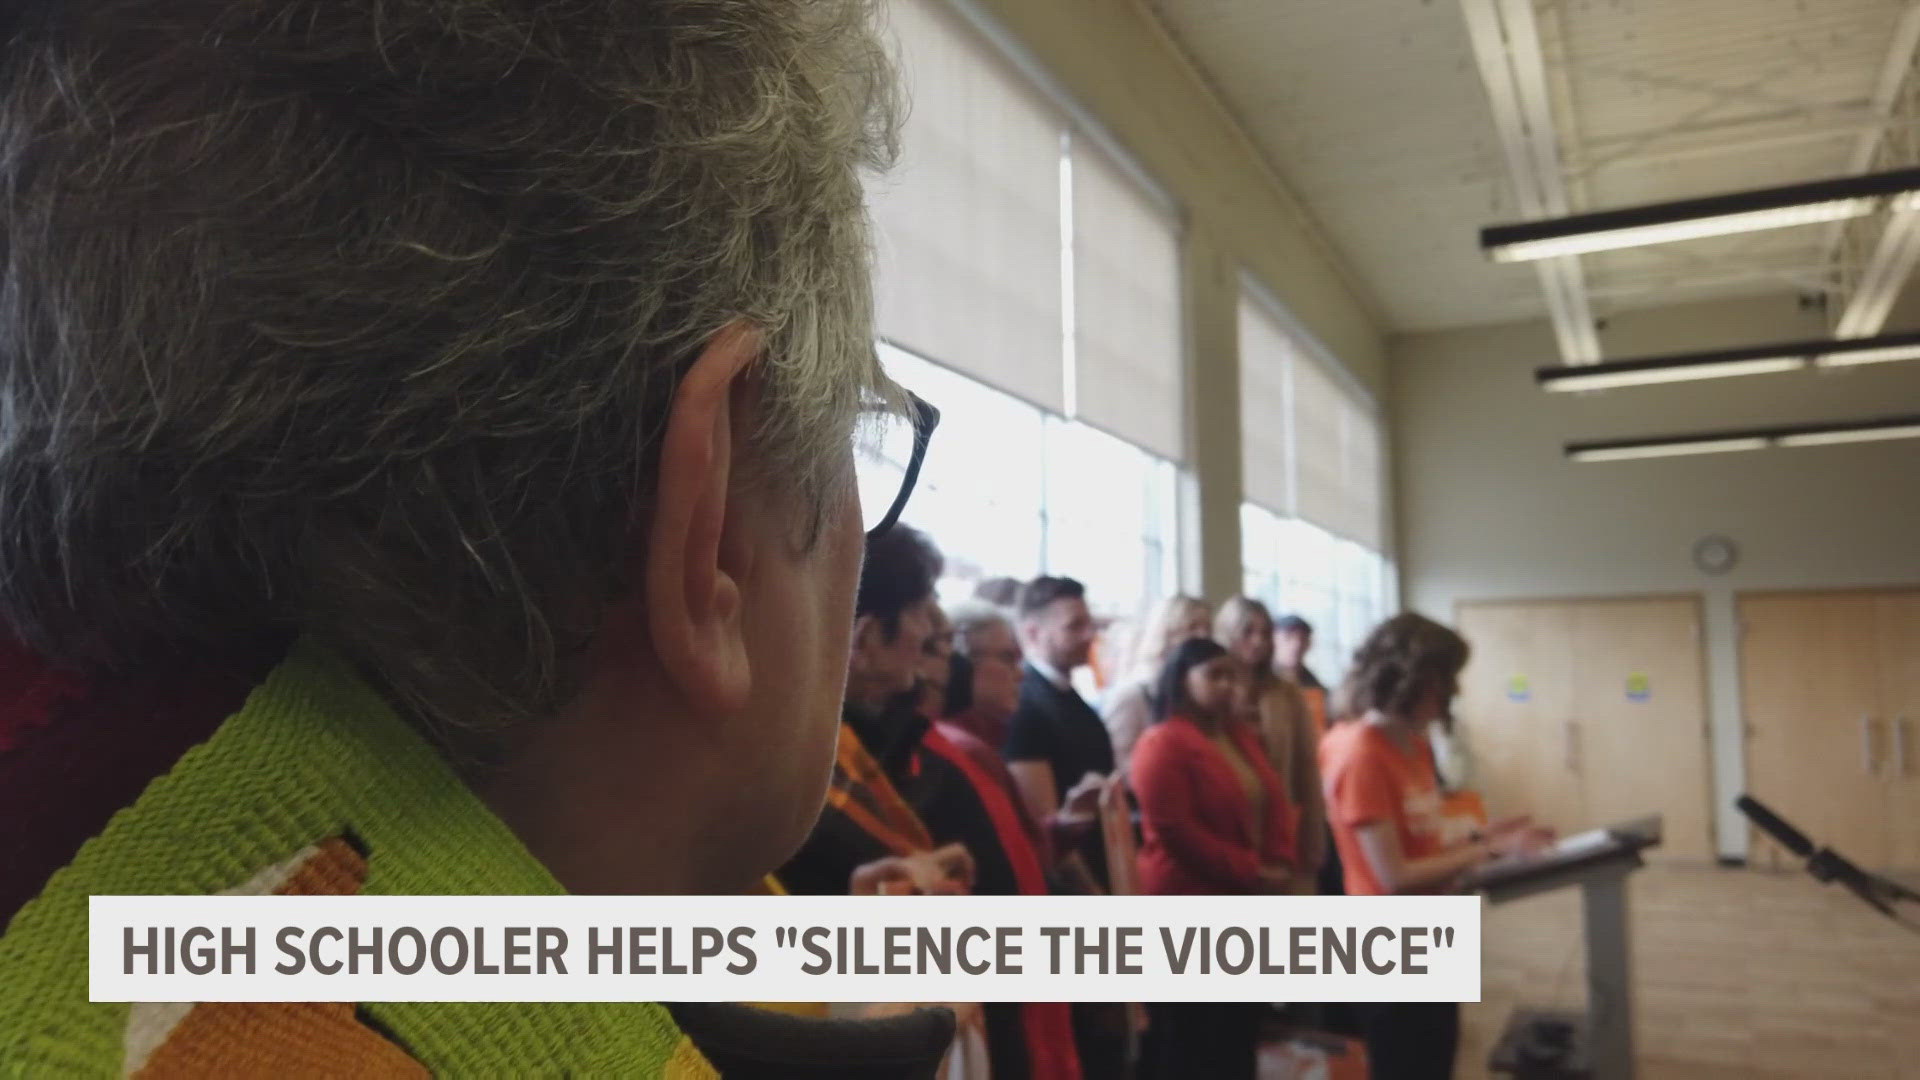 There will be two events in Holland for Silence the Violence Month of Action, just a few of the 30 events being held in 24 locations throughout the state.